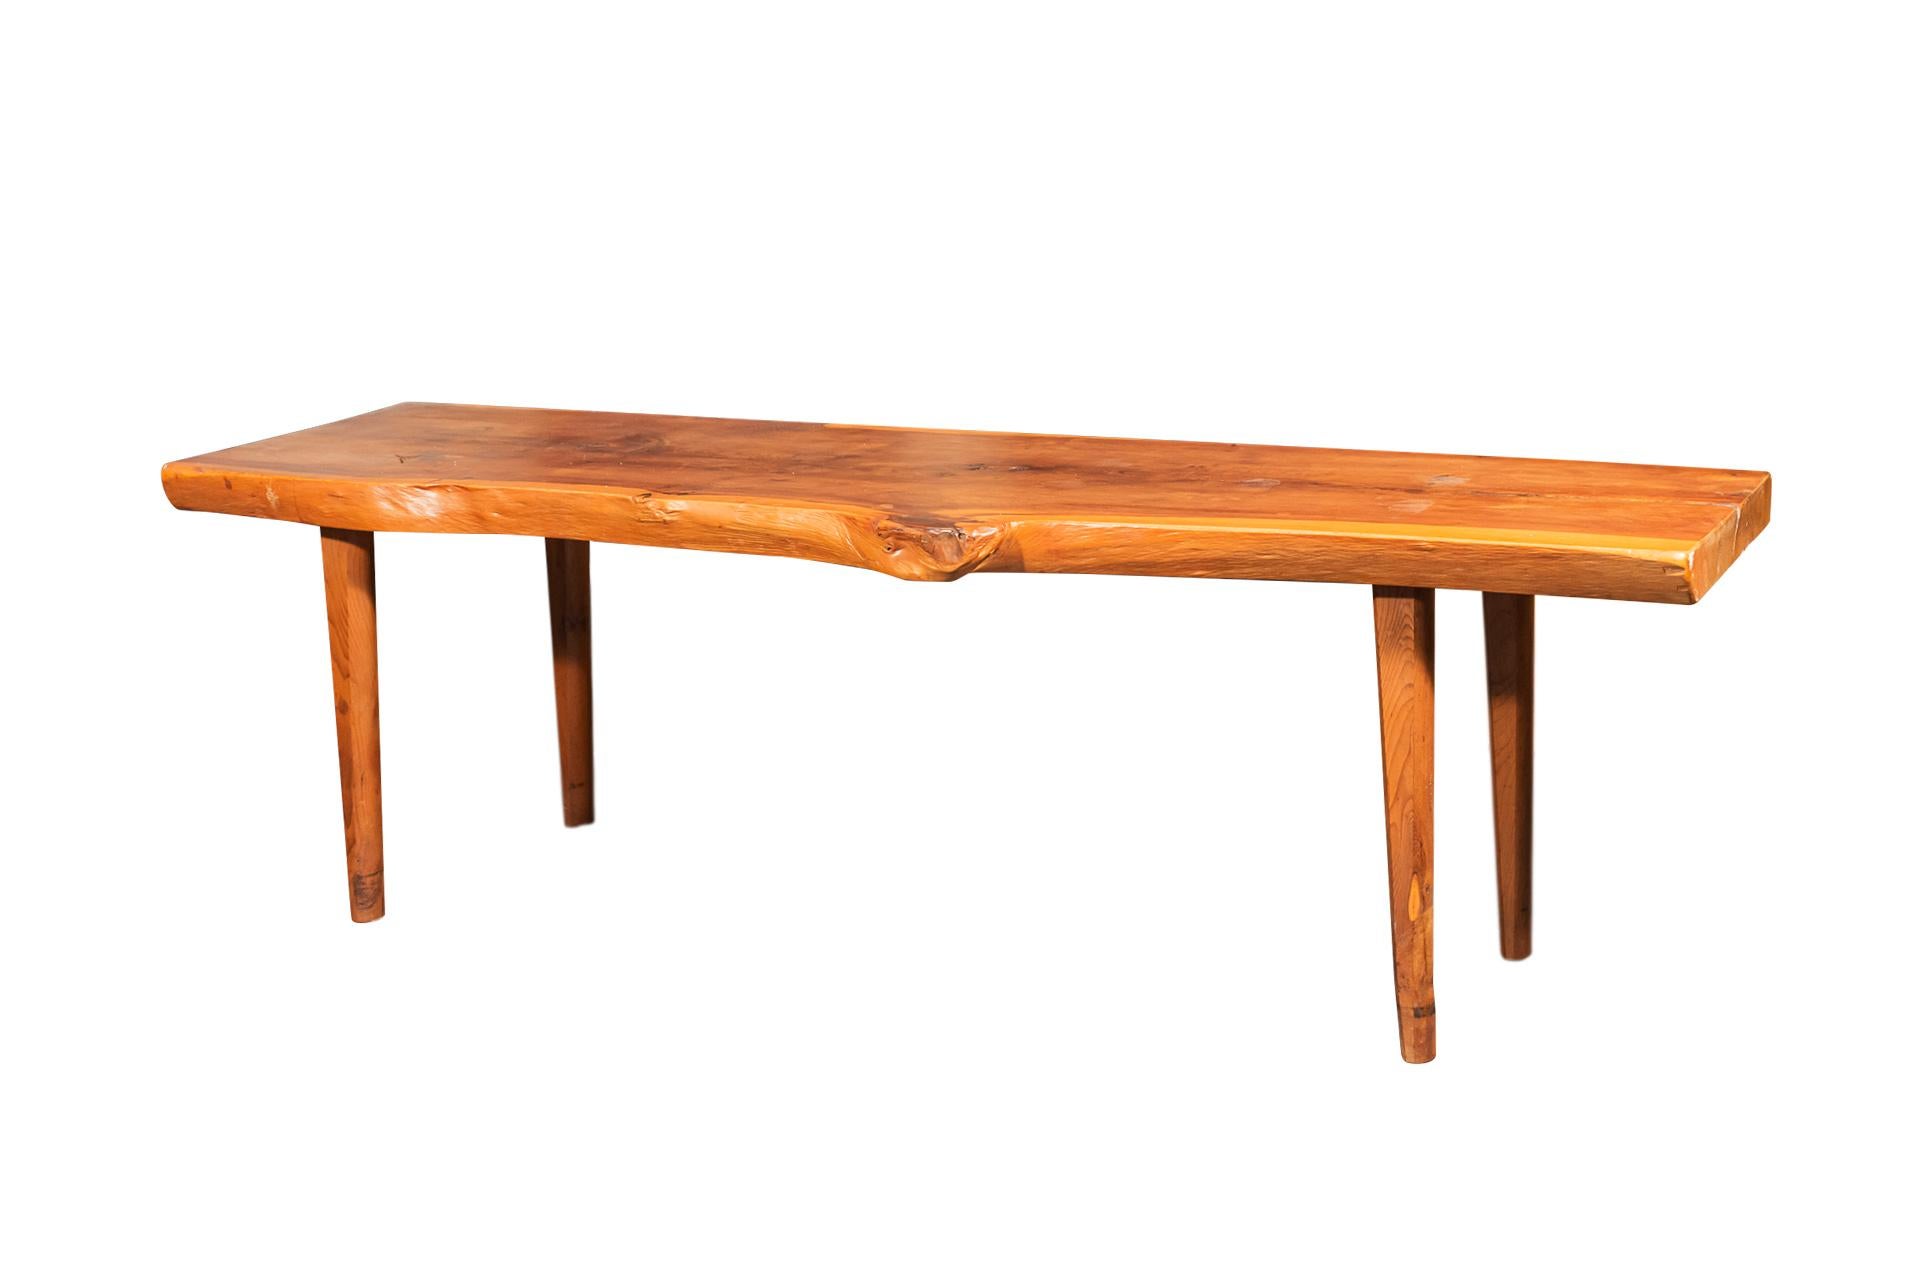 In the style of Nakashima,
Brutalist coffee table,
Wood,
France, circa 1960.

Measures: Width 125 cm, depth 38 cm, height 39 cm.